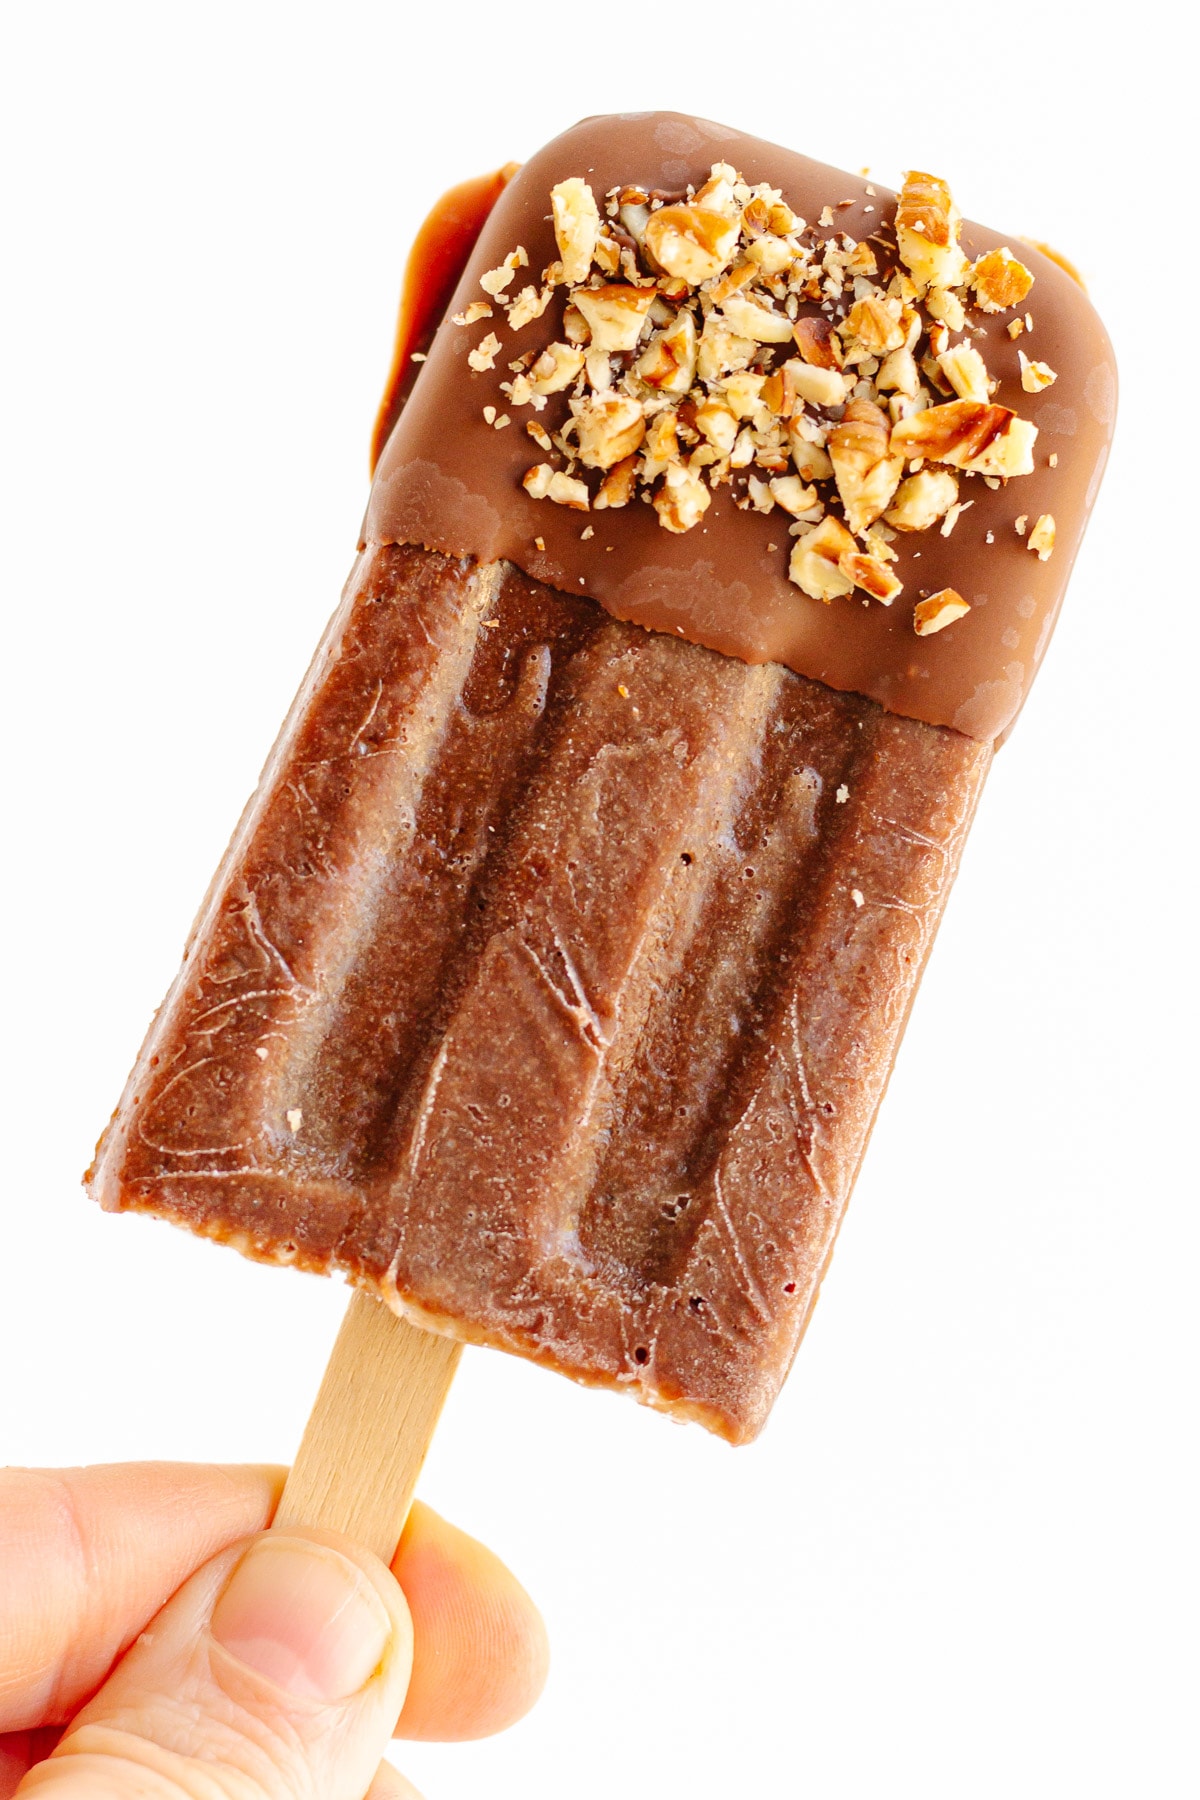 Hand holding a chocolate banana popsicle that is dipped in chocolate and chopped nuts.